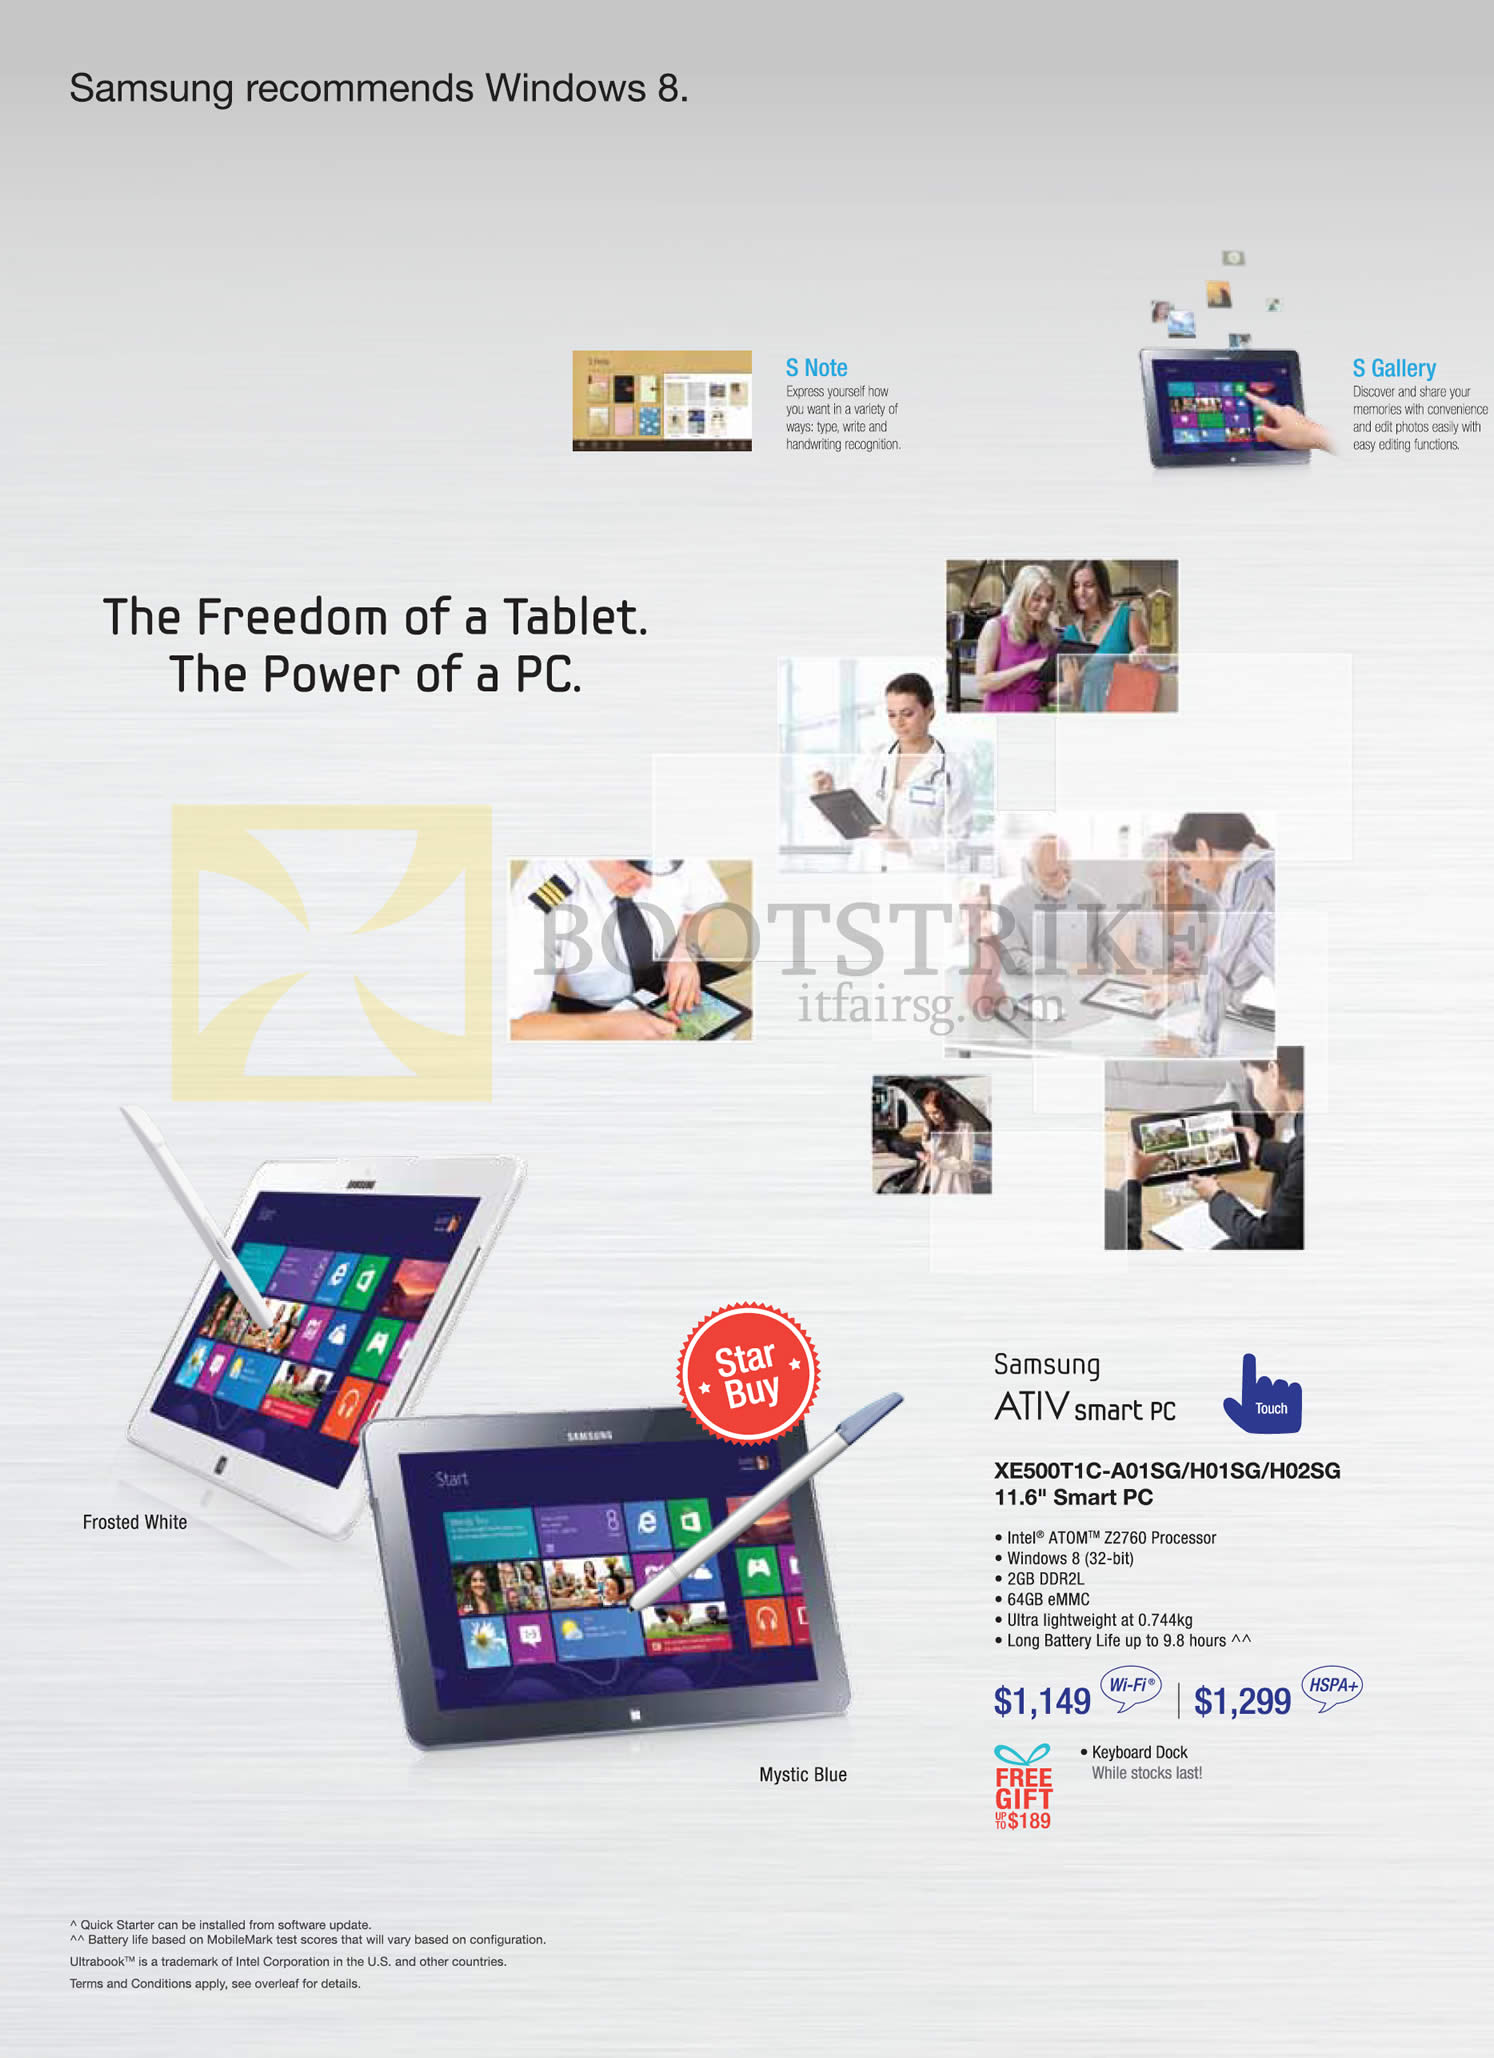 PC SHOW 2013 price list image brochure of Samsung Tablets ATIV Smart PC XE500T1C-A01SG, H01SG, H02SG